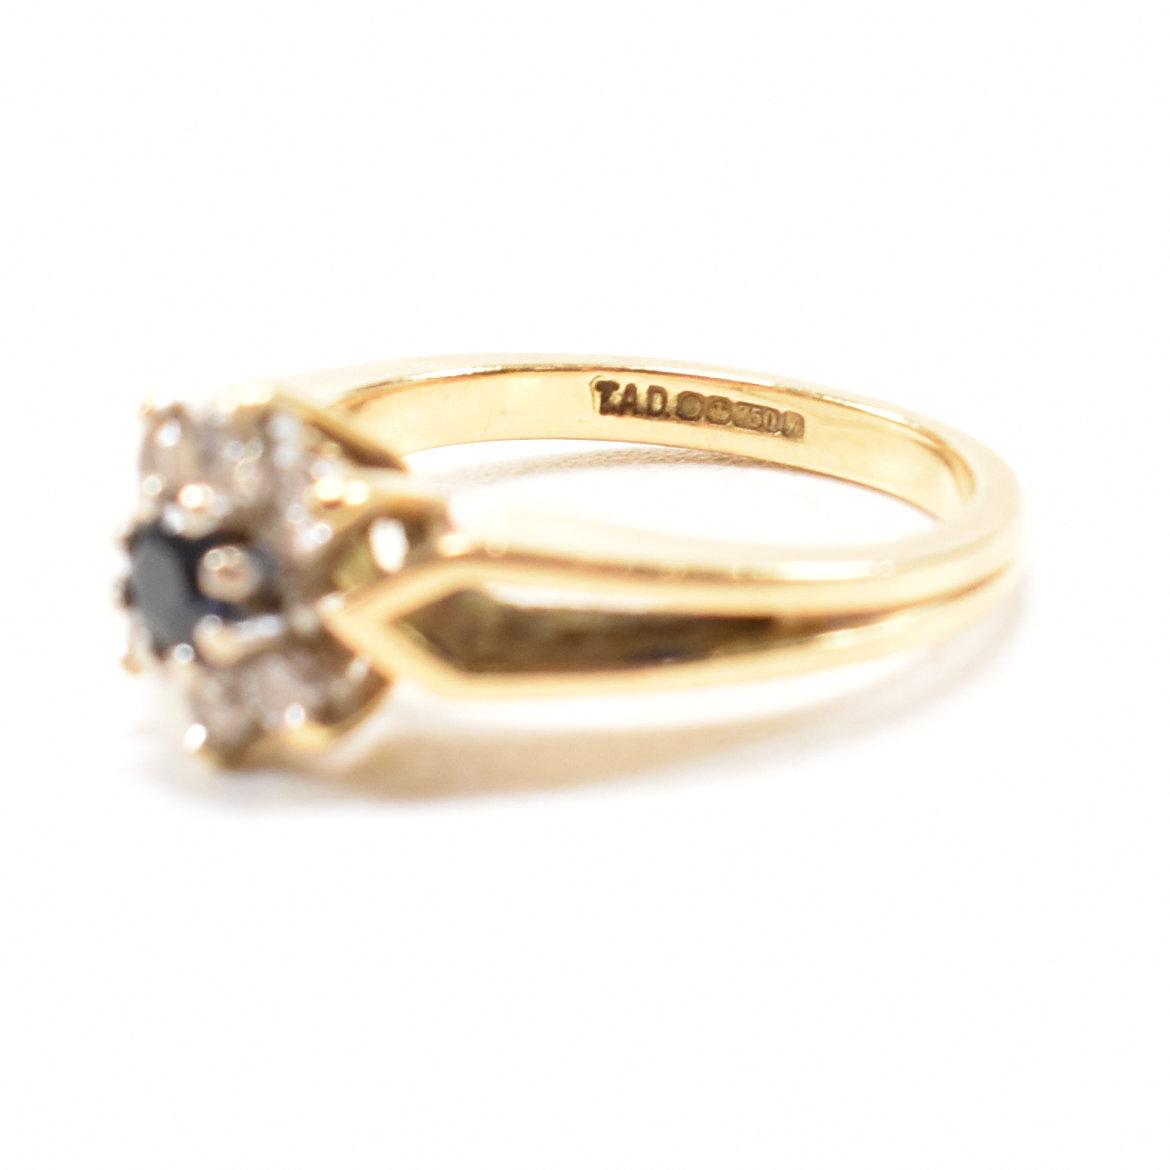 HALLMARKED 18CT GOLD DIAMOND & SAPPHIRE CLUSTER RING - Image 4 of 6